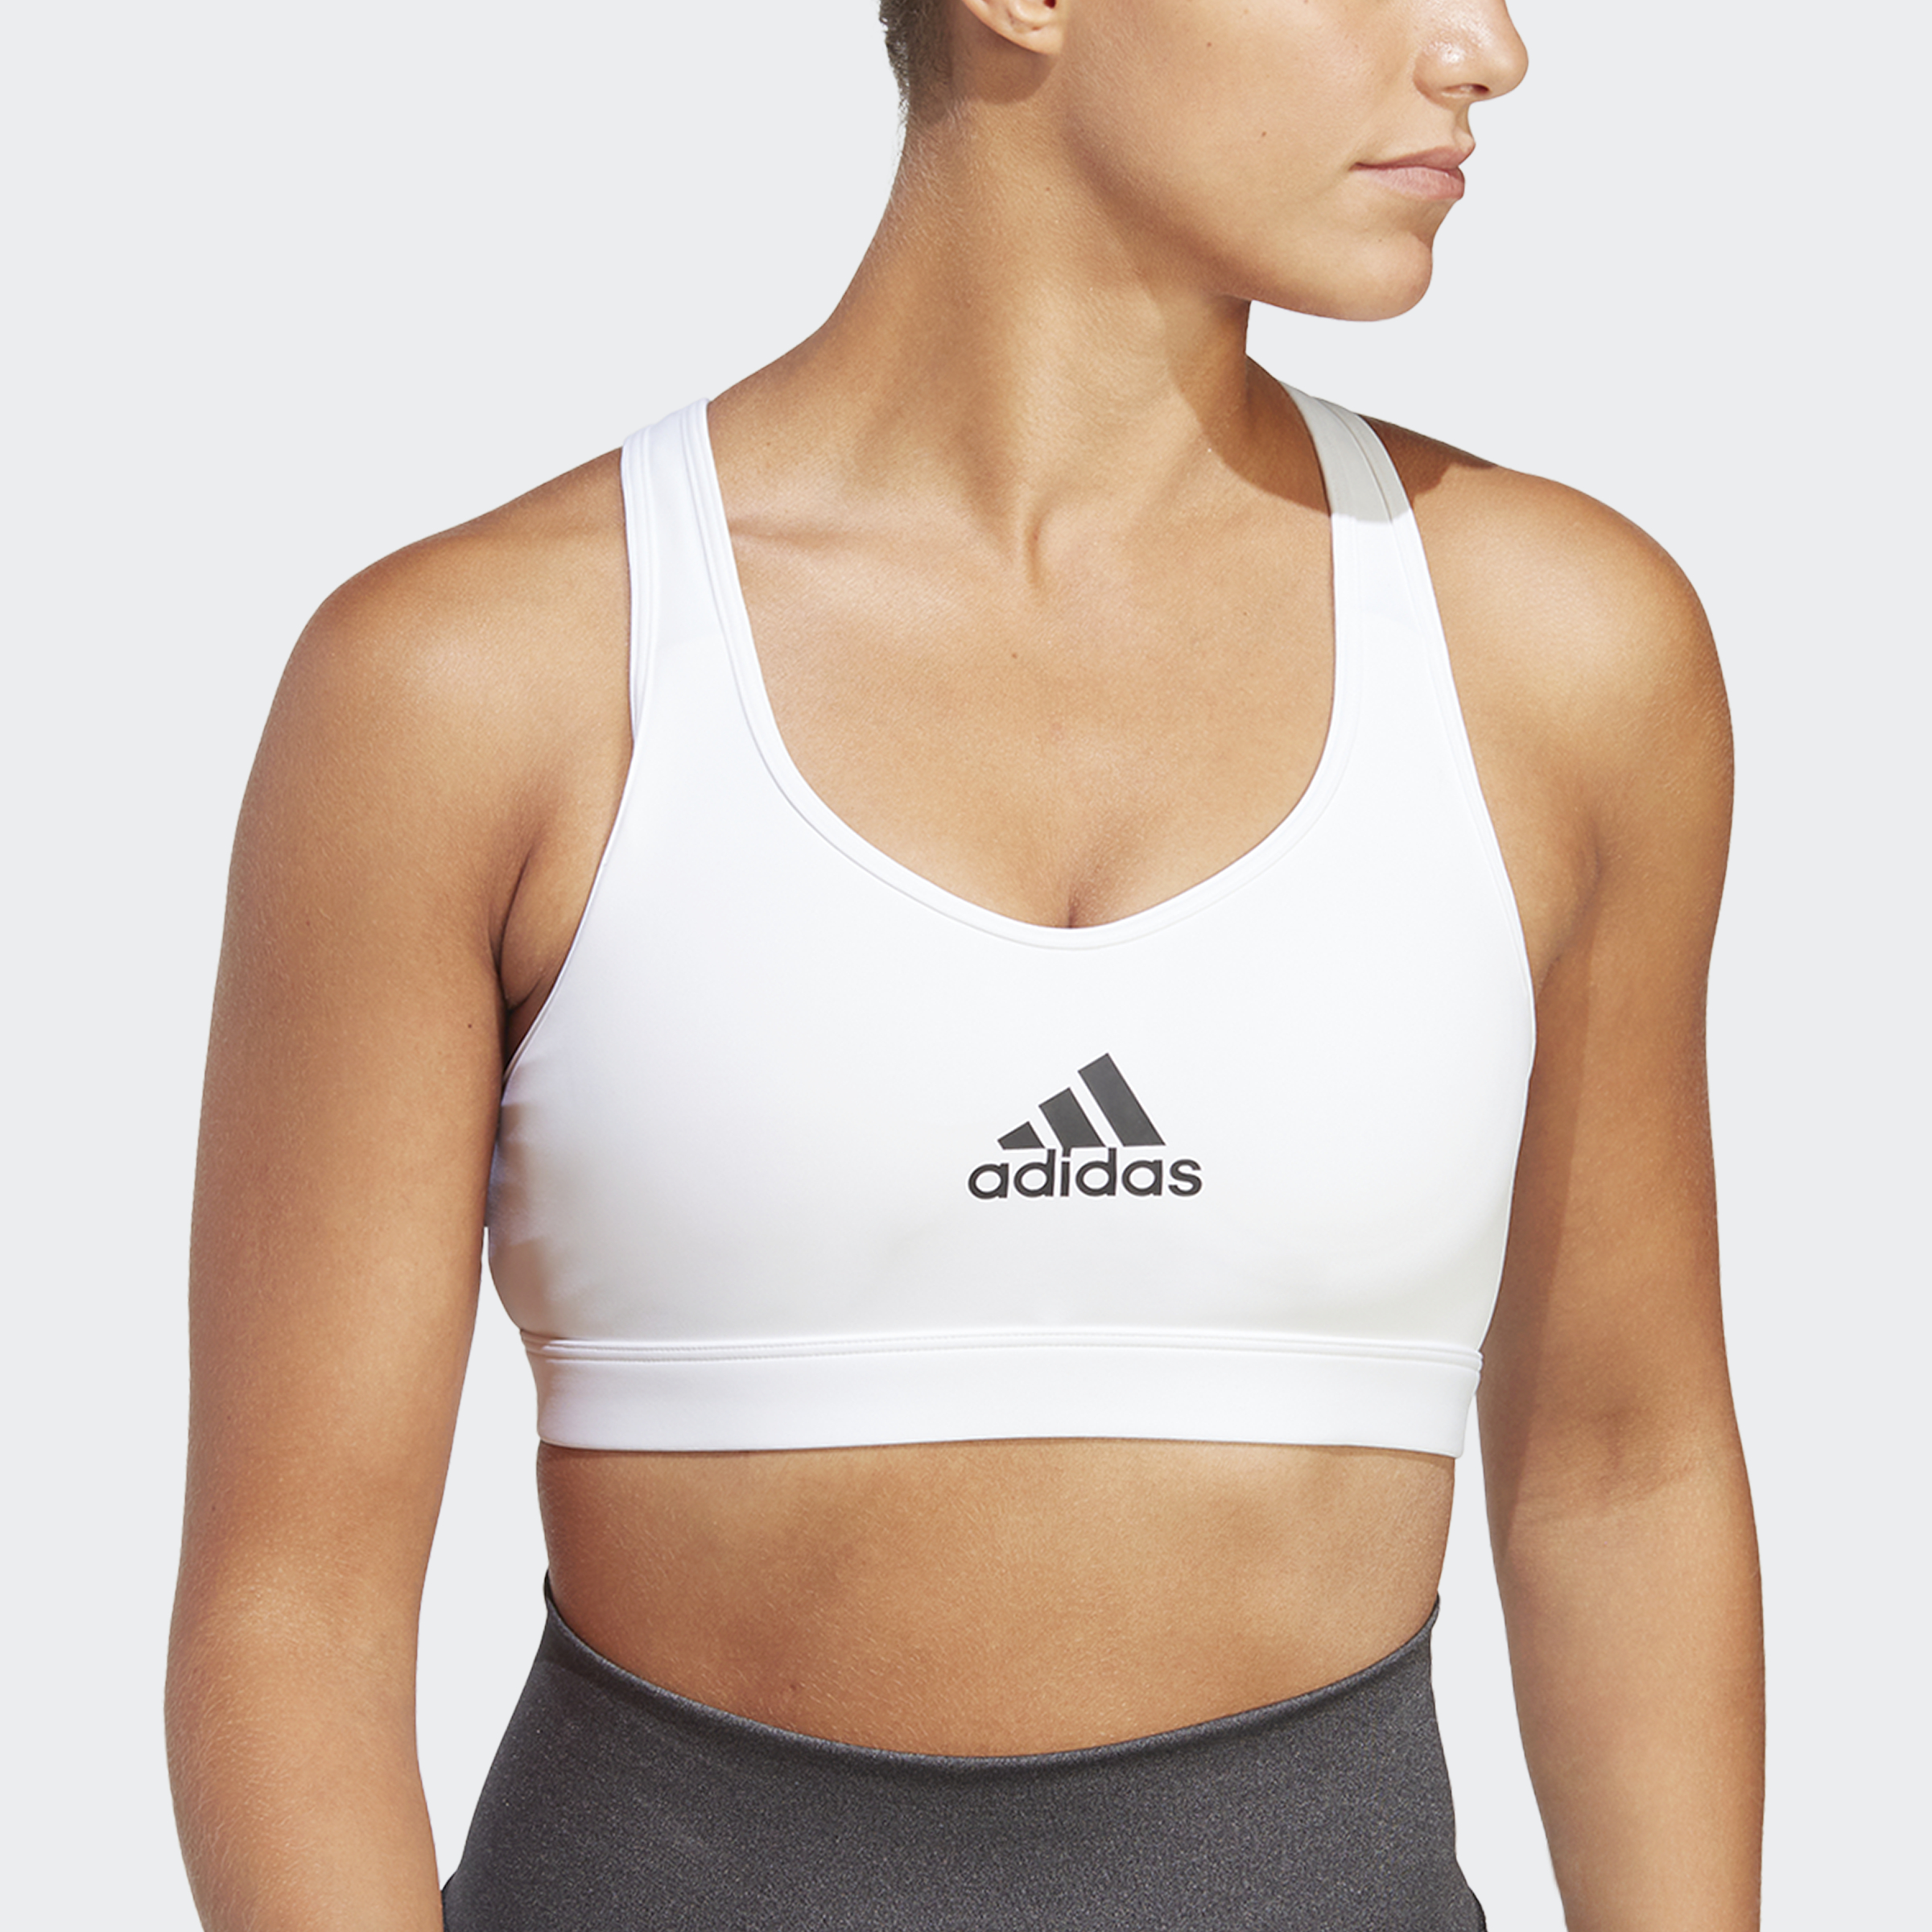 adidas TLRD Impact Training High-Support Sports Bra Women - Cup size DD -  black/white HF2297